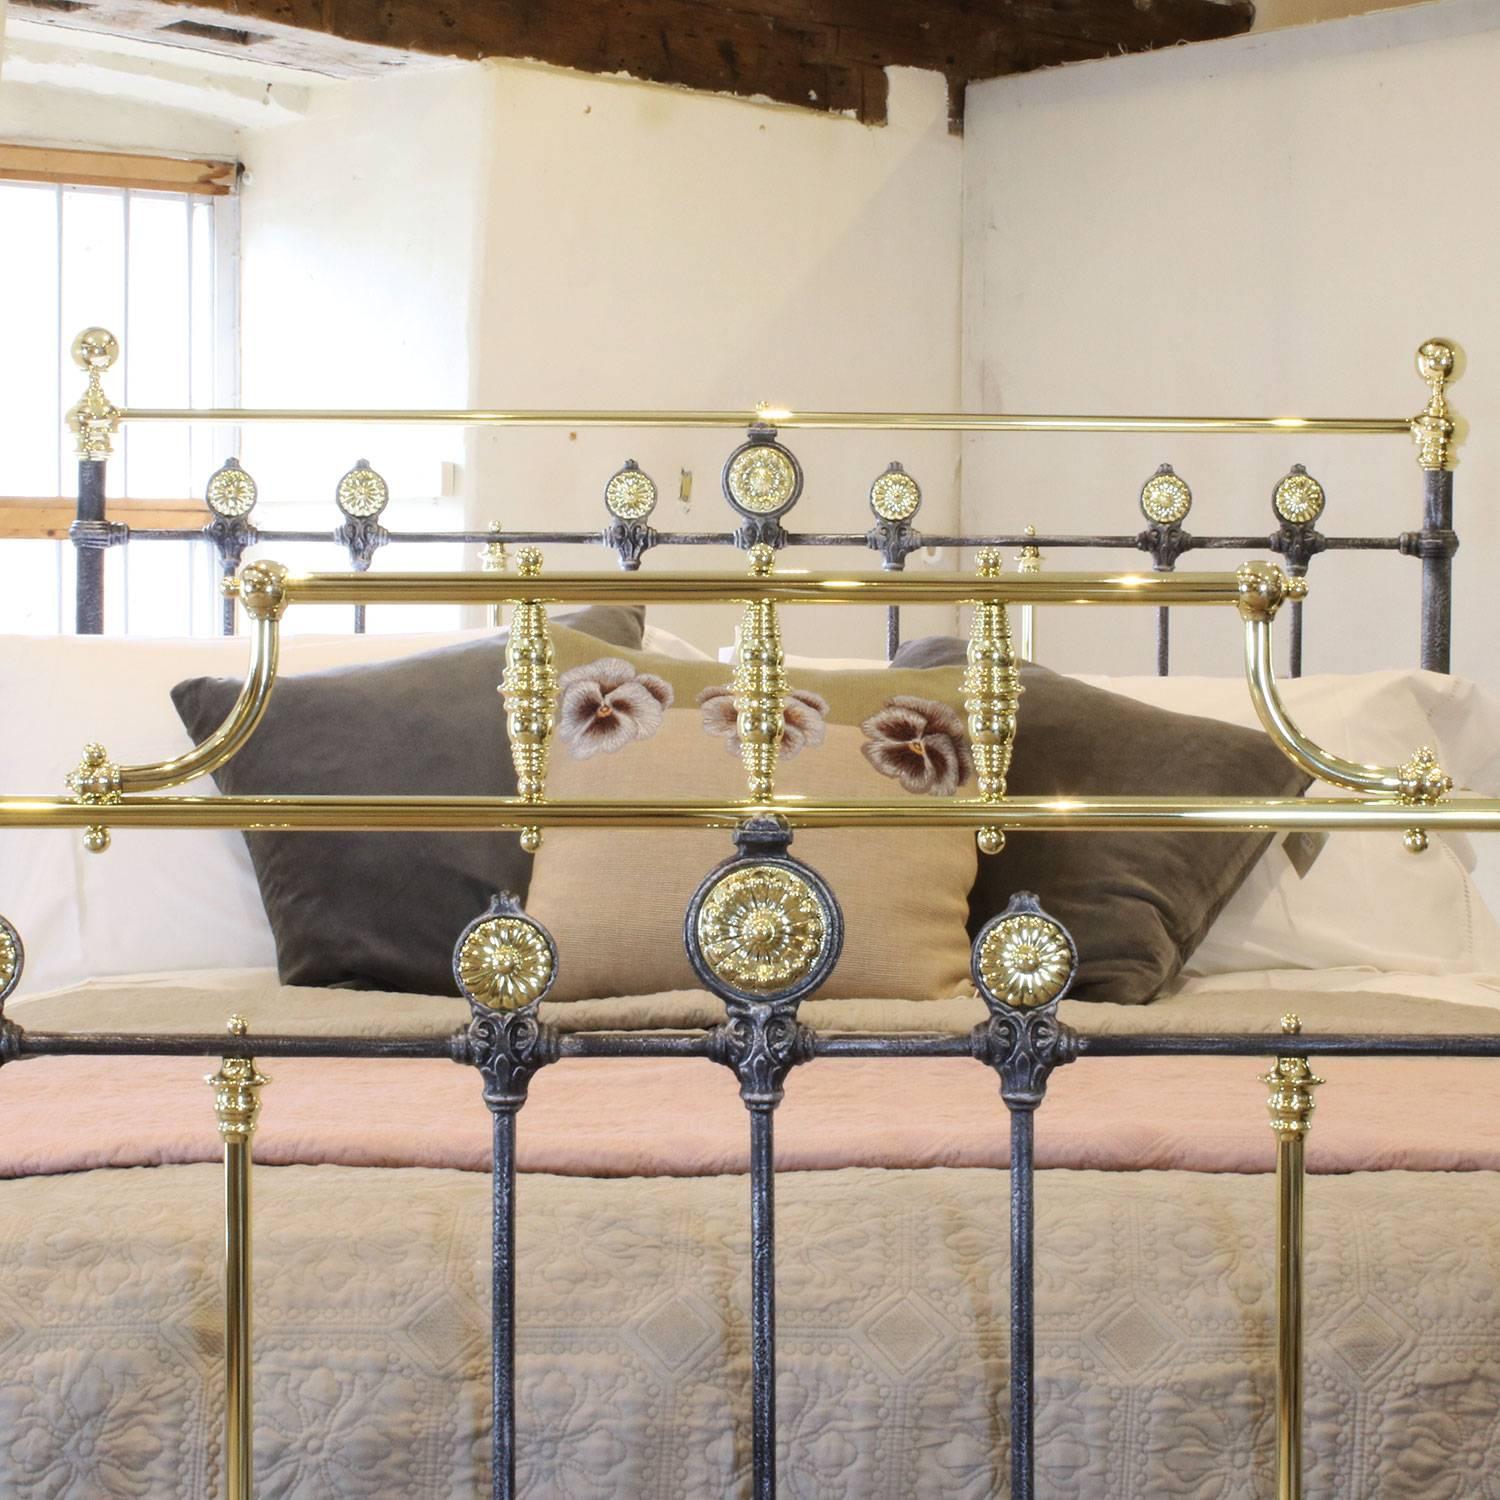 Cast Brass and Iron Decorative Bedstead in Charcoal, MK134